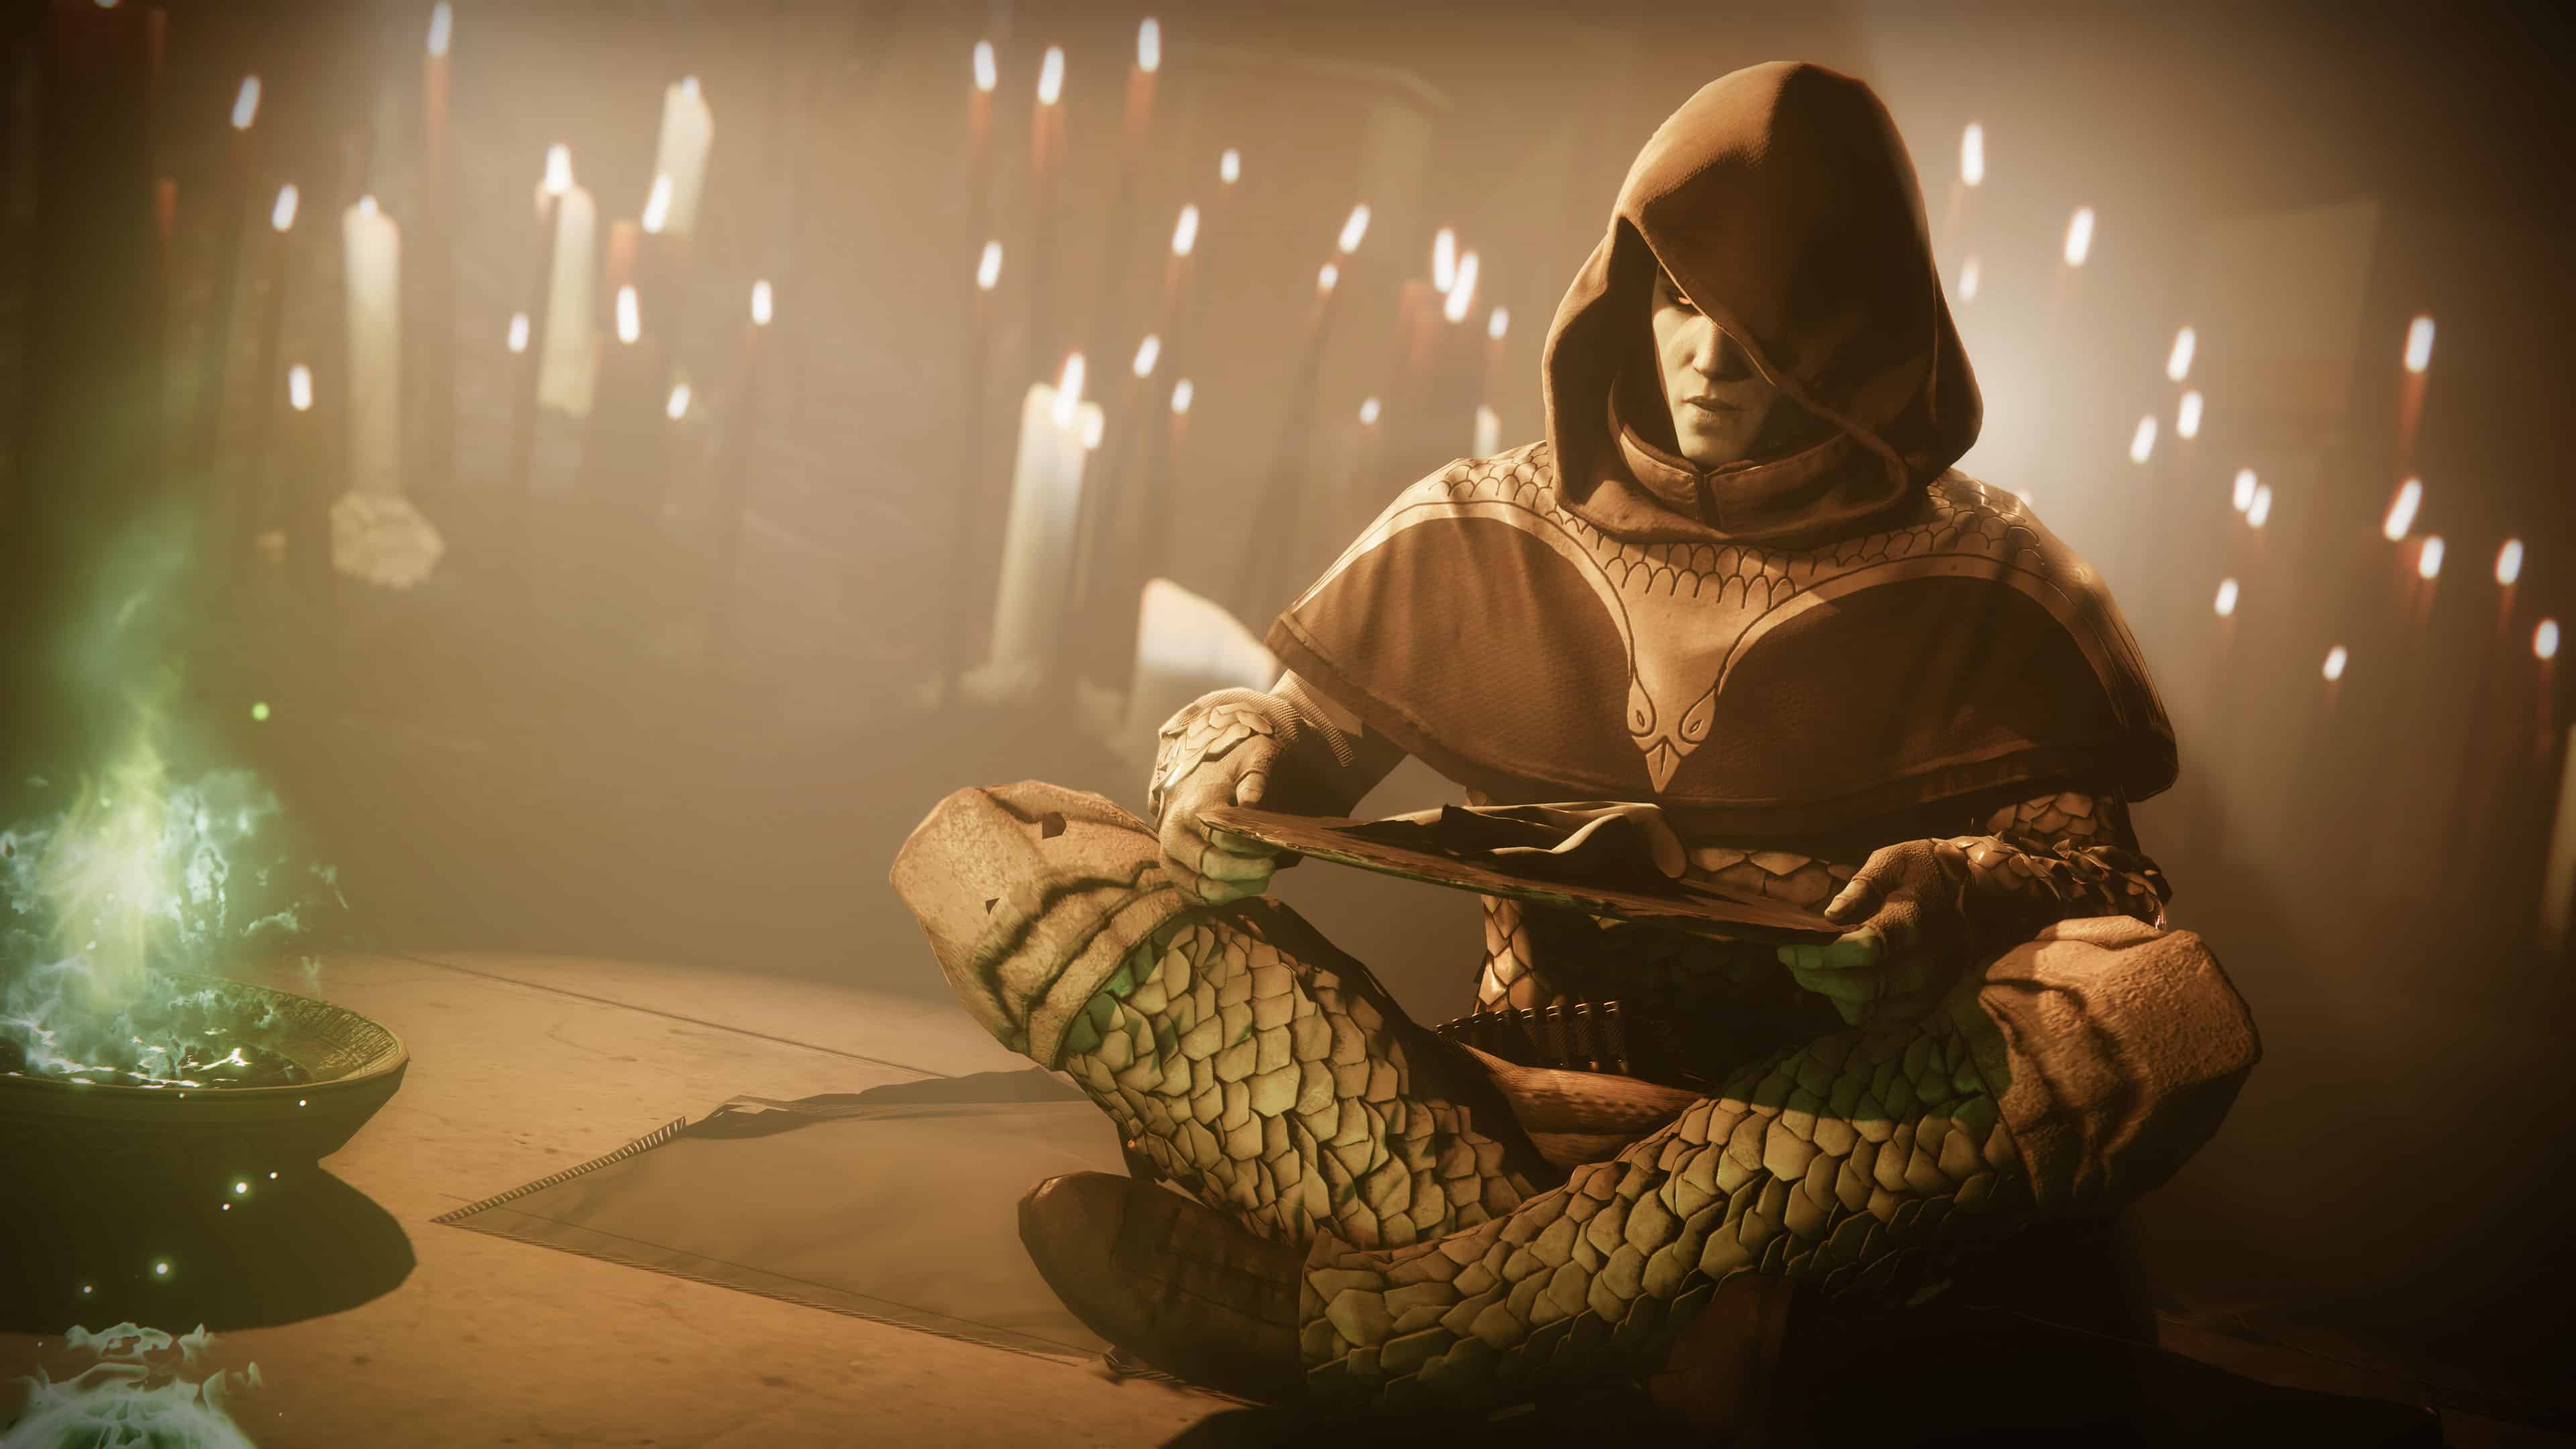 How to Complete the Leviathan Chests Seasonal Challenge in Destiny 2